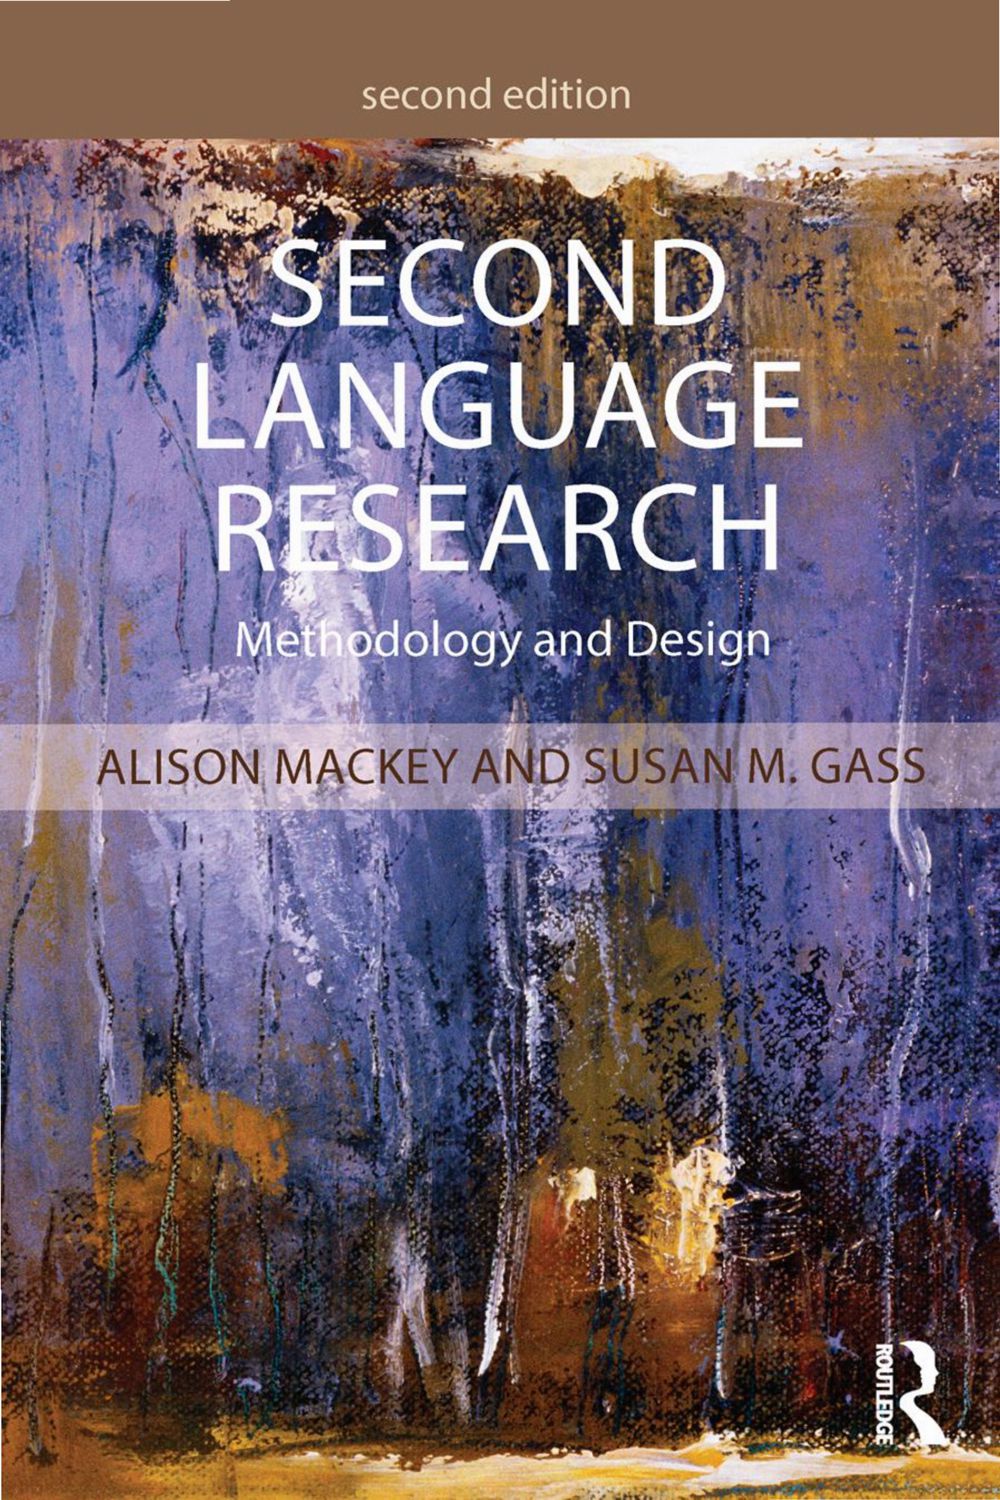 second-language-research-methodology-and-design-2nd-ed-by-alison-mackey-susan-m-gass